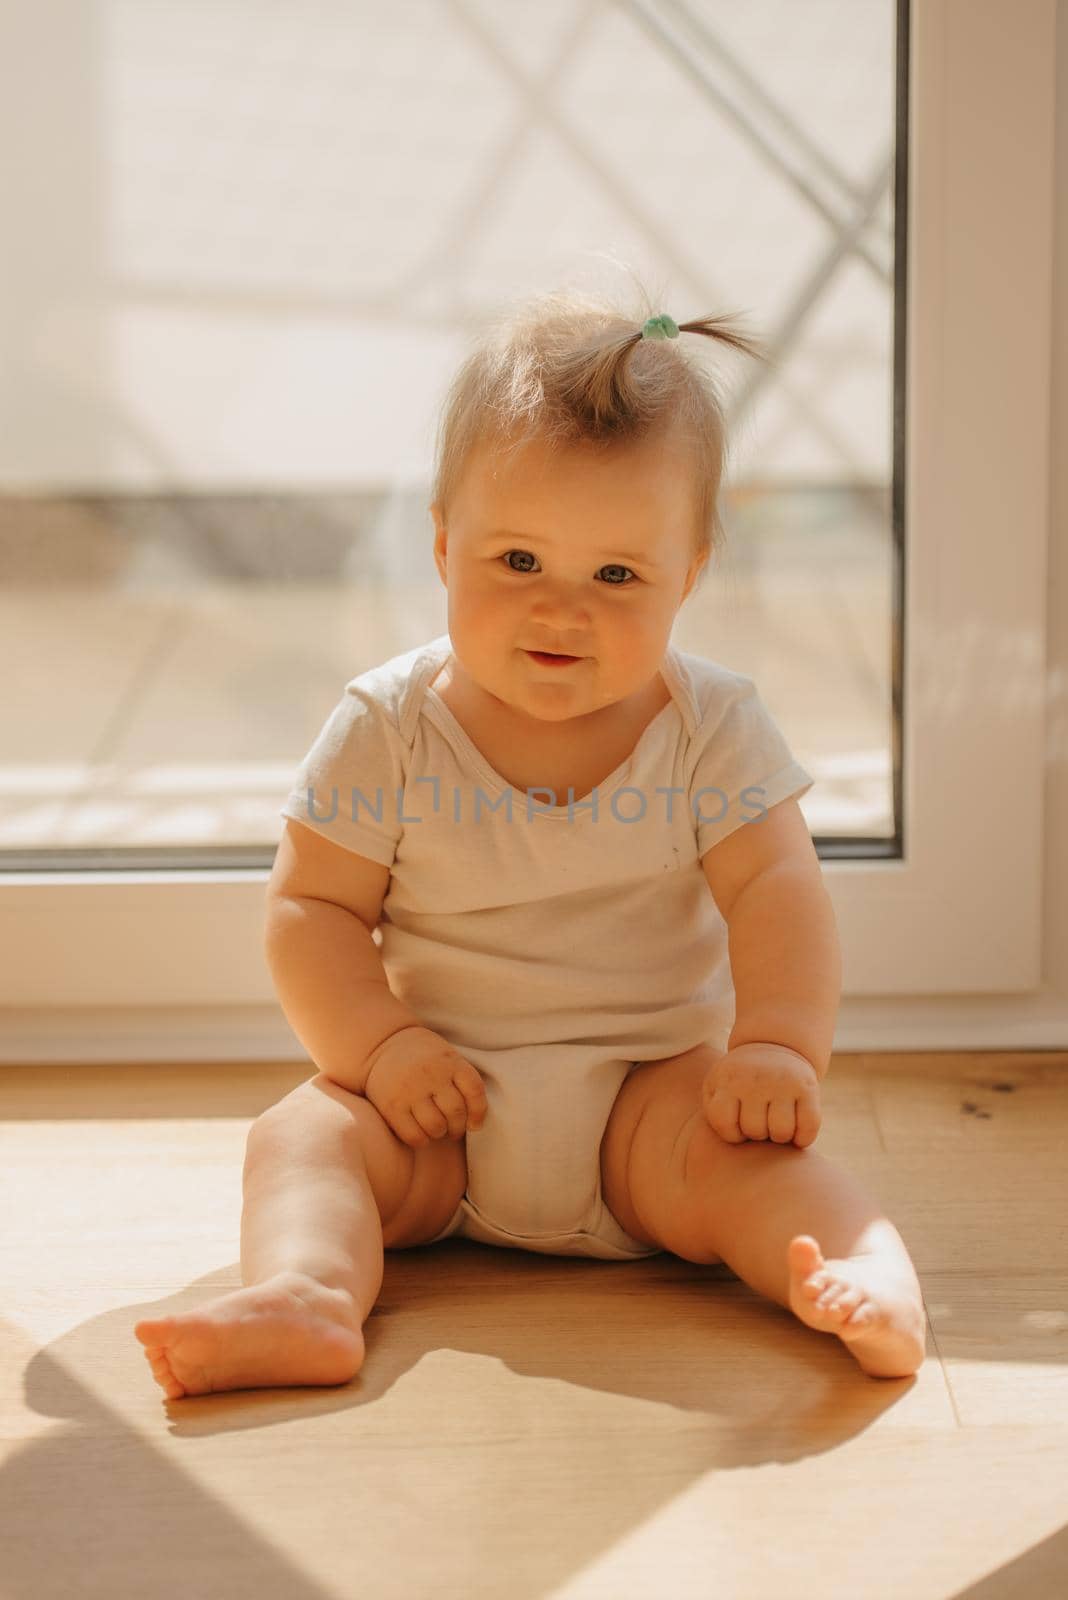 A 7-month girl is sitting near a balcony door in a bodysuit at home. A cute infant is waiting for her parents in the sunlight.